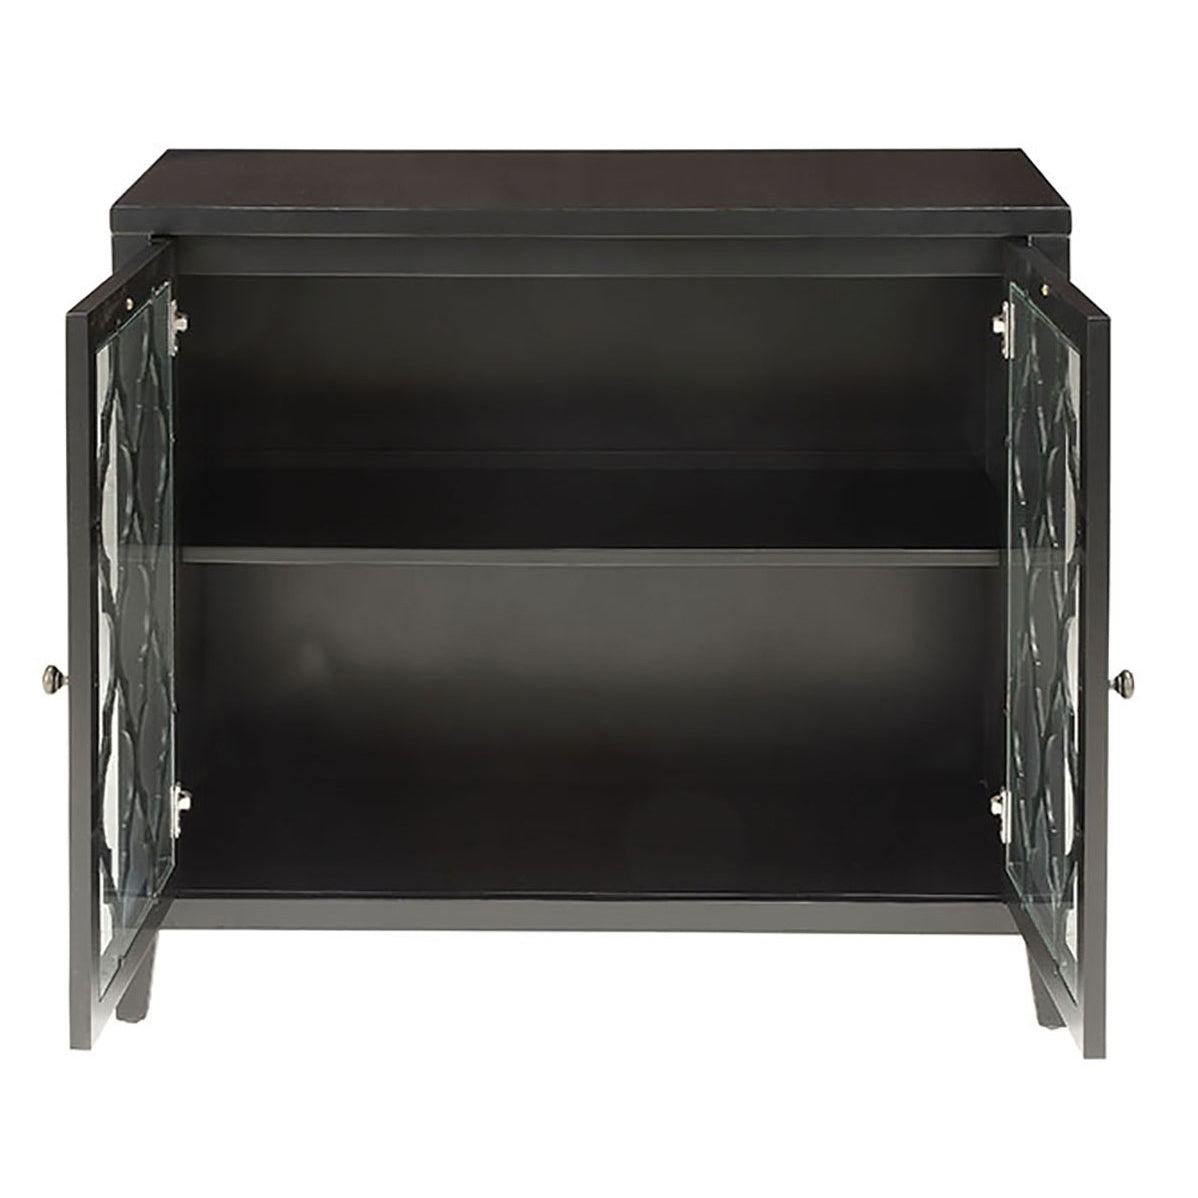 Black Console Table With Shelf Inside - Black